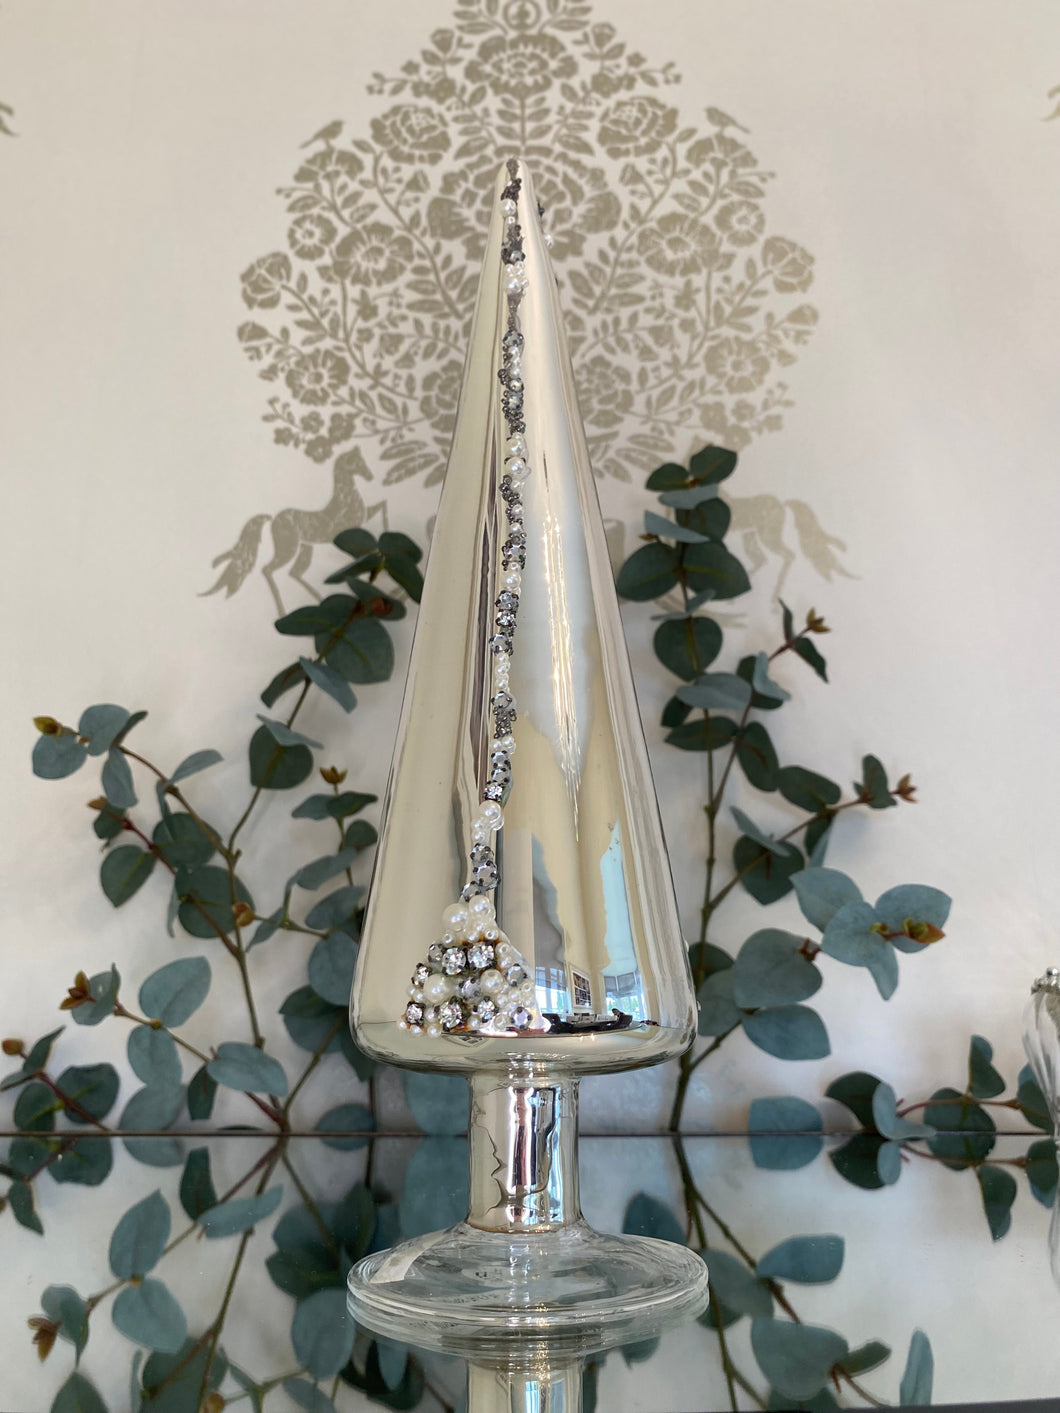 Silver embellished glass Christmas tree